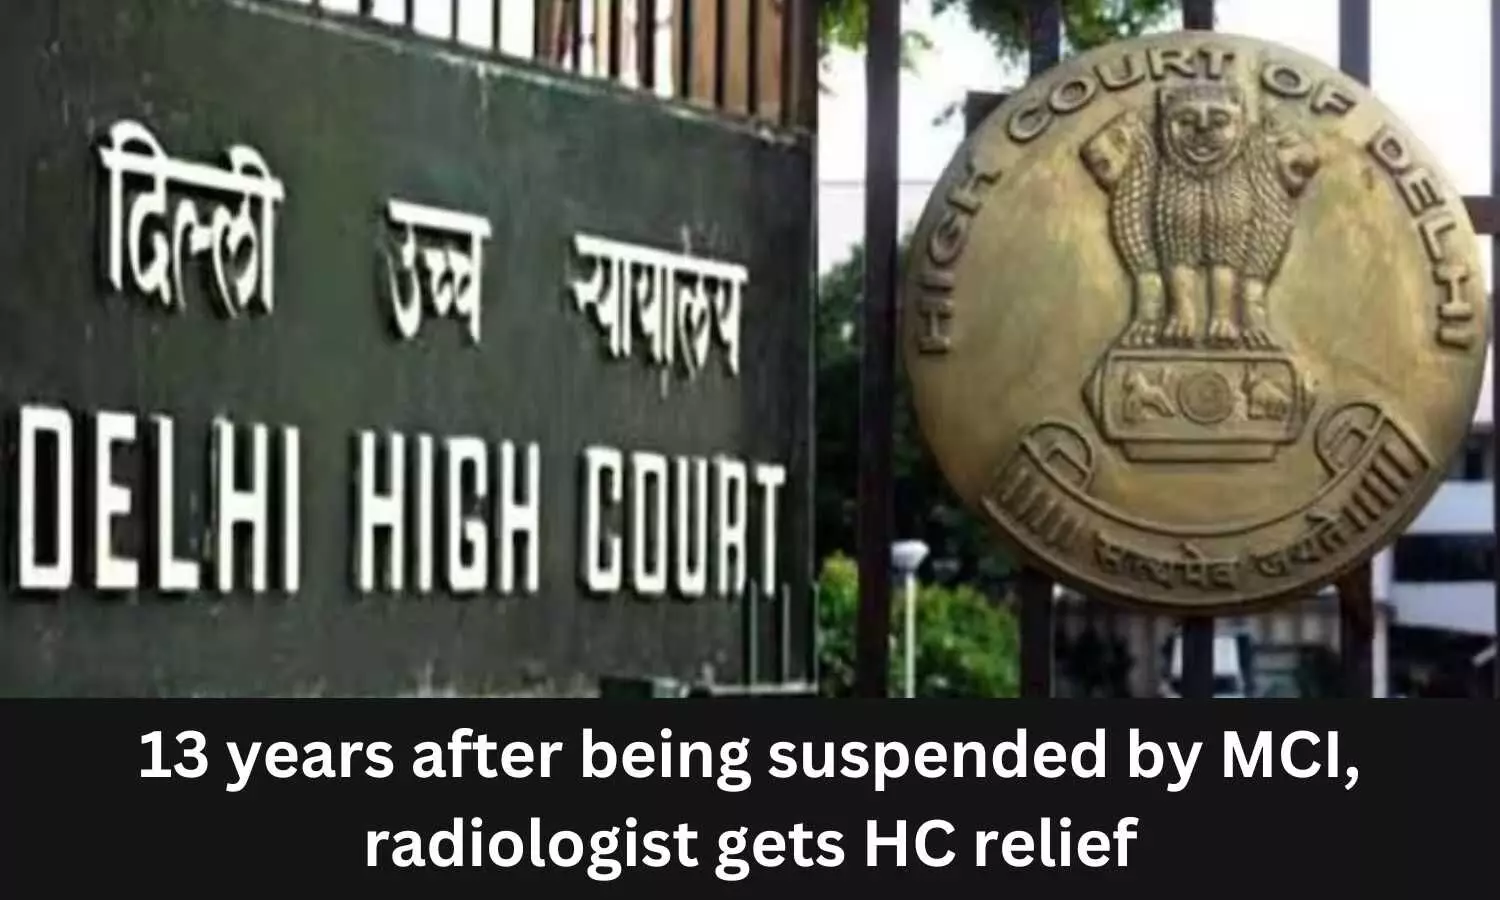 13 years after being suspended by MCI, radiologist gets HC relief